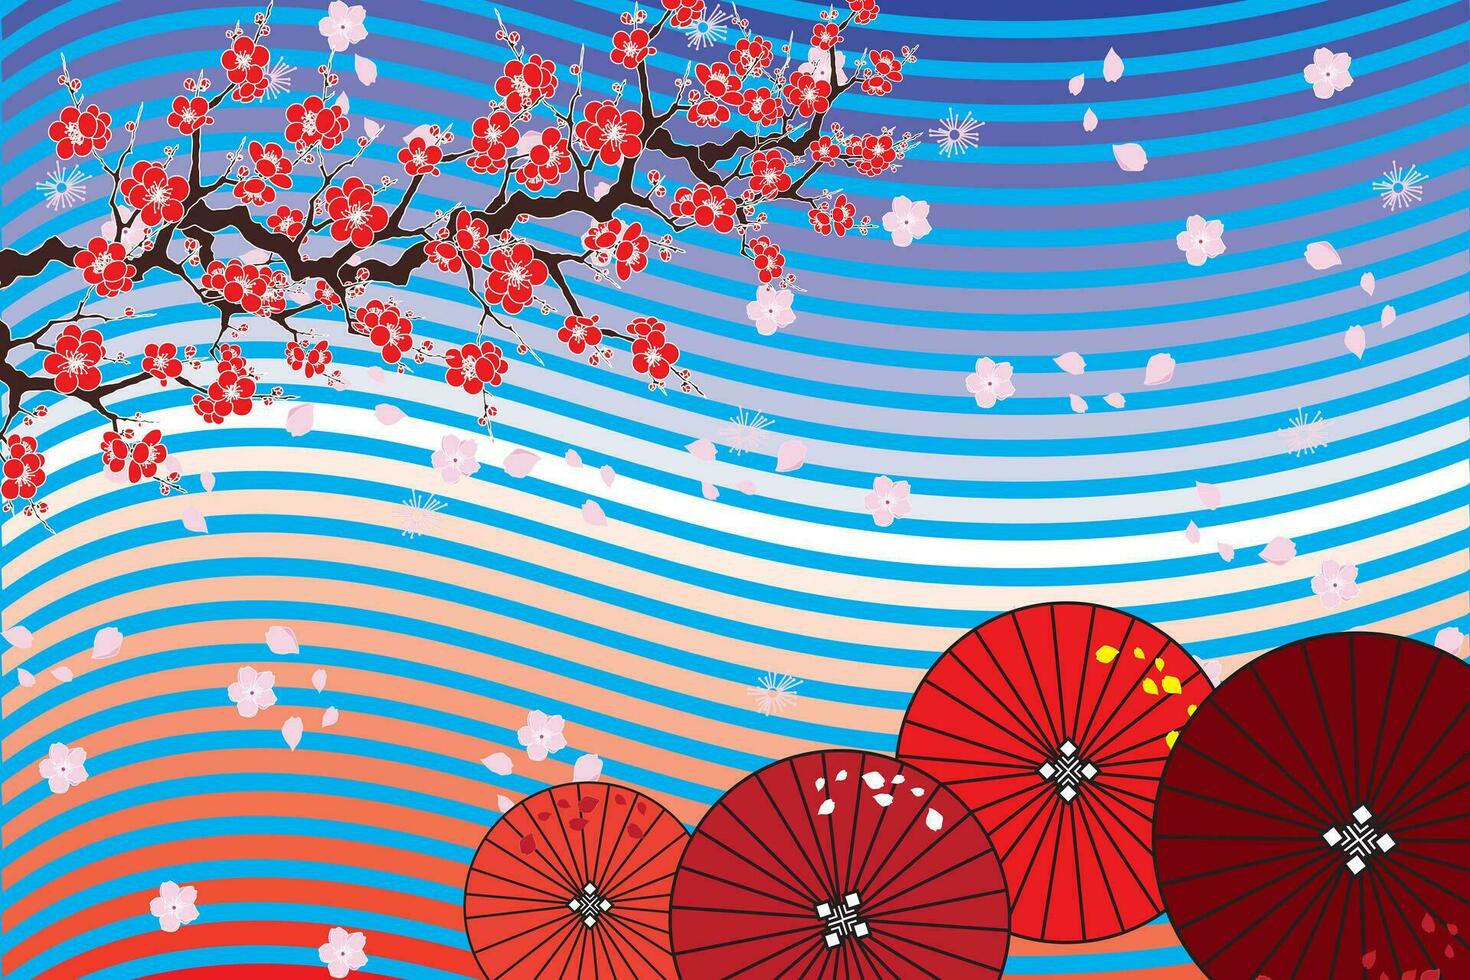 Red cherry blossoms on branch and umbrellas on a blue line background with scattered flowers. vector